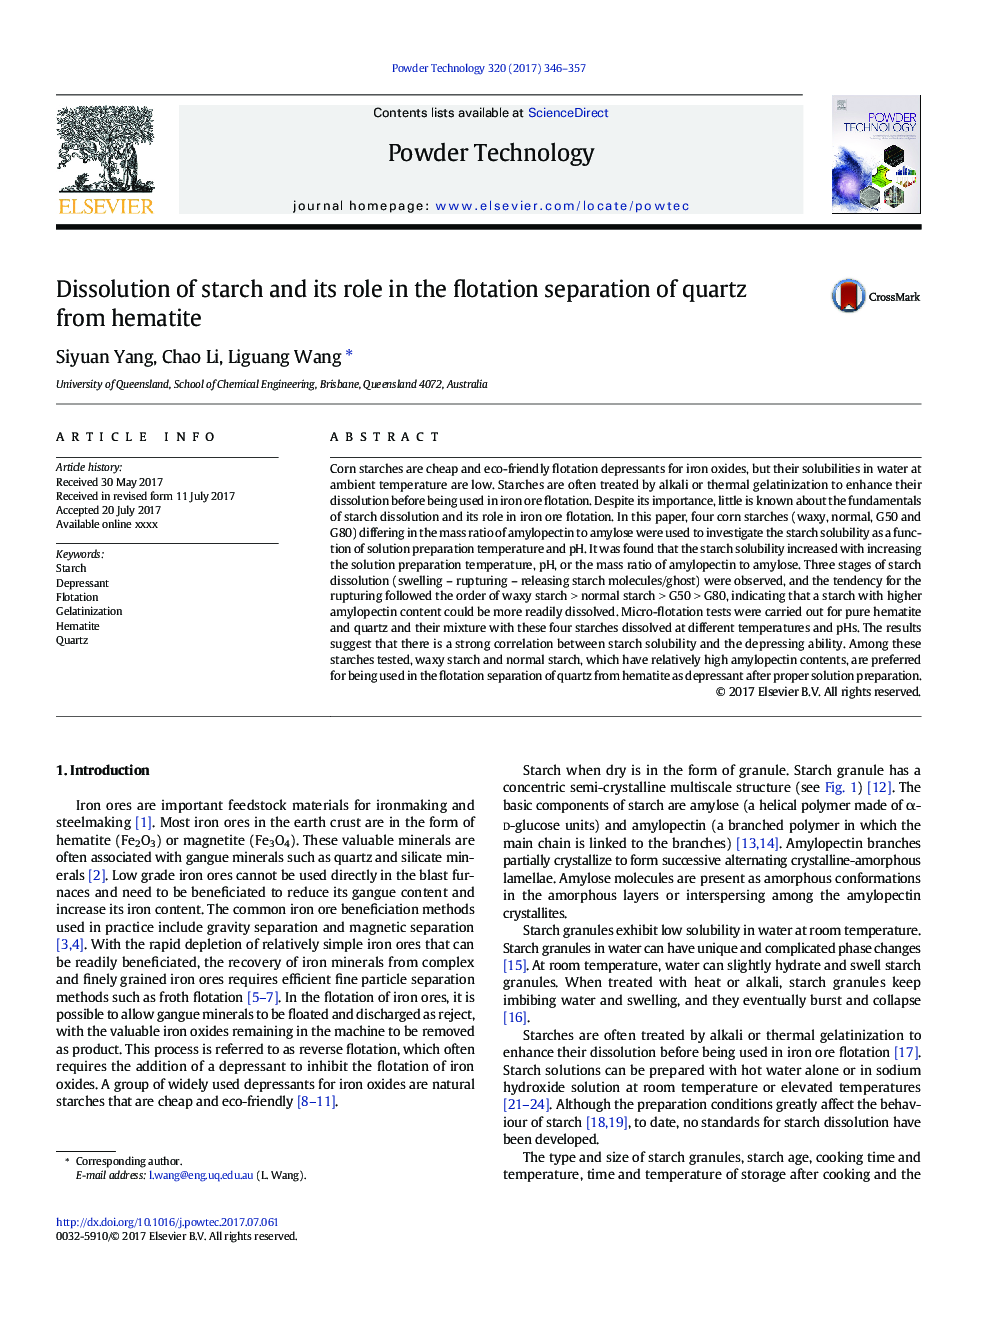 Dissolution of starch and its role in the flotation separation of quartz from hematite